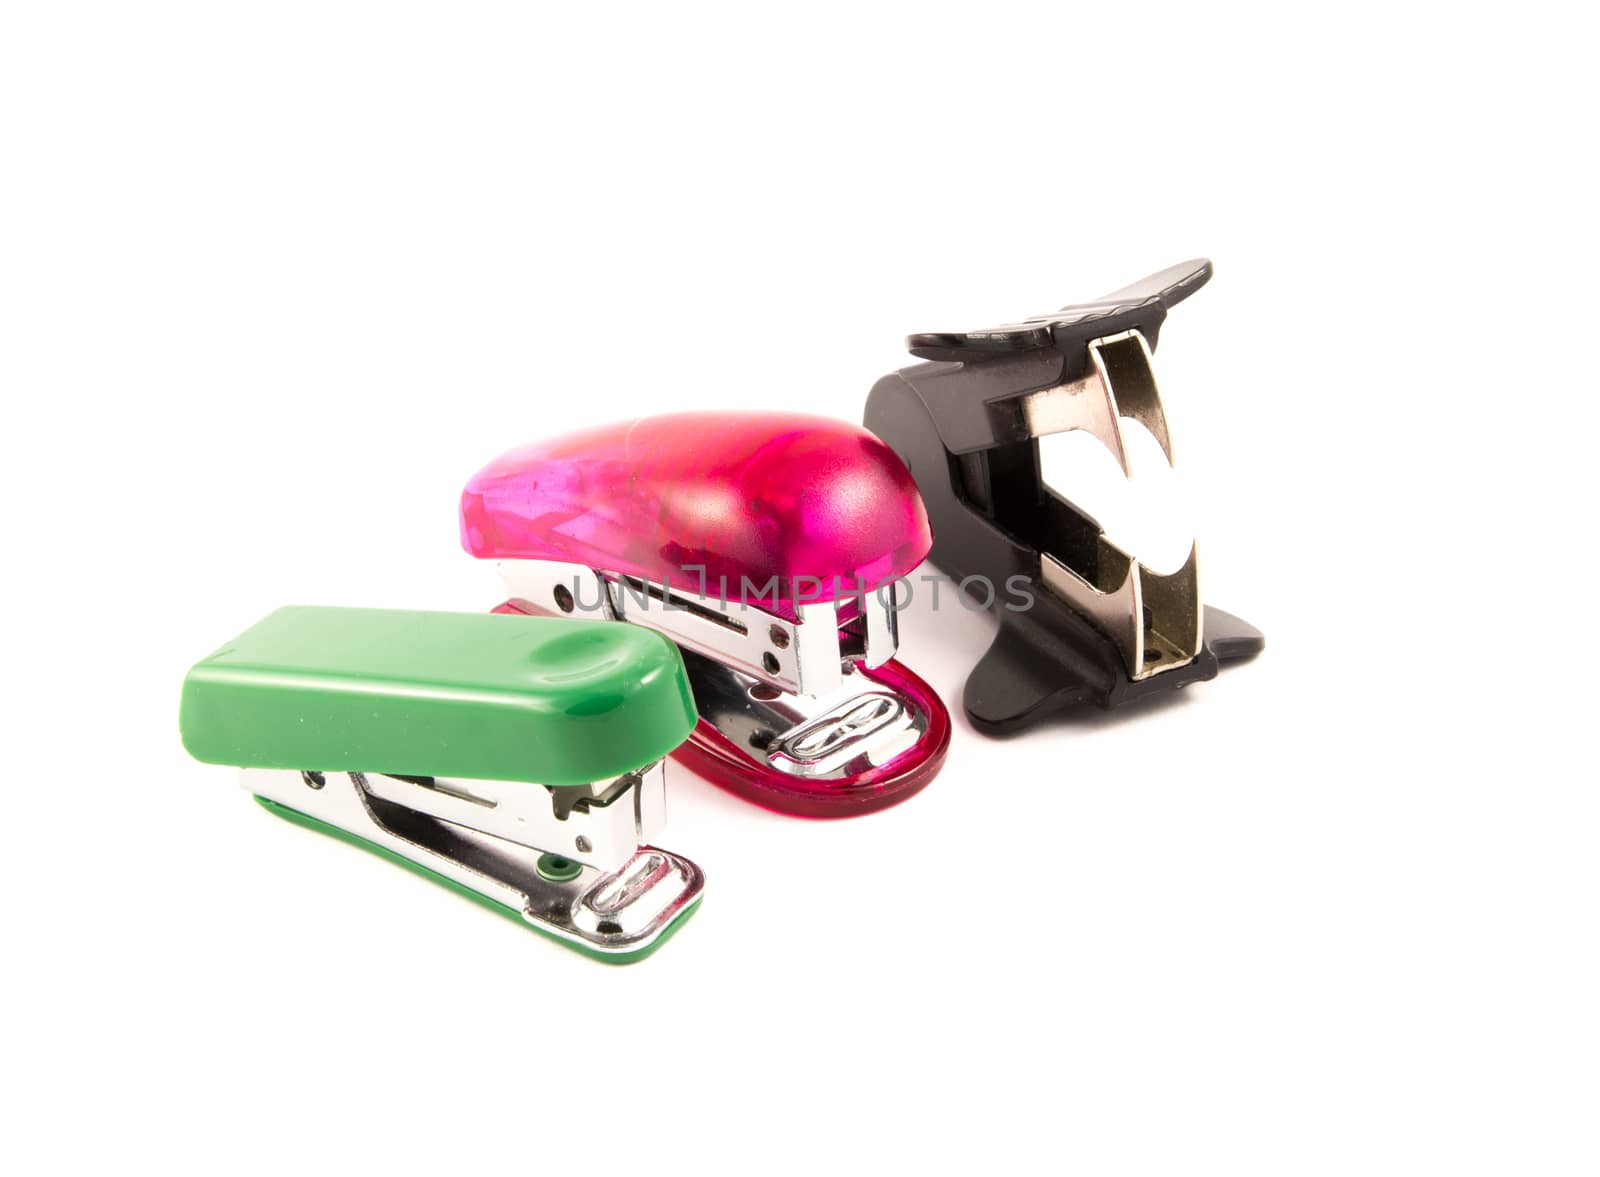 two stapler and staple remover by Mieszko9